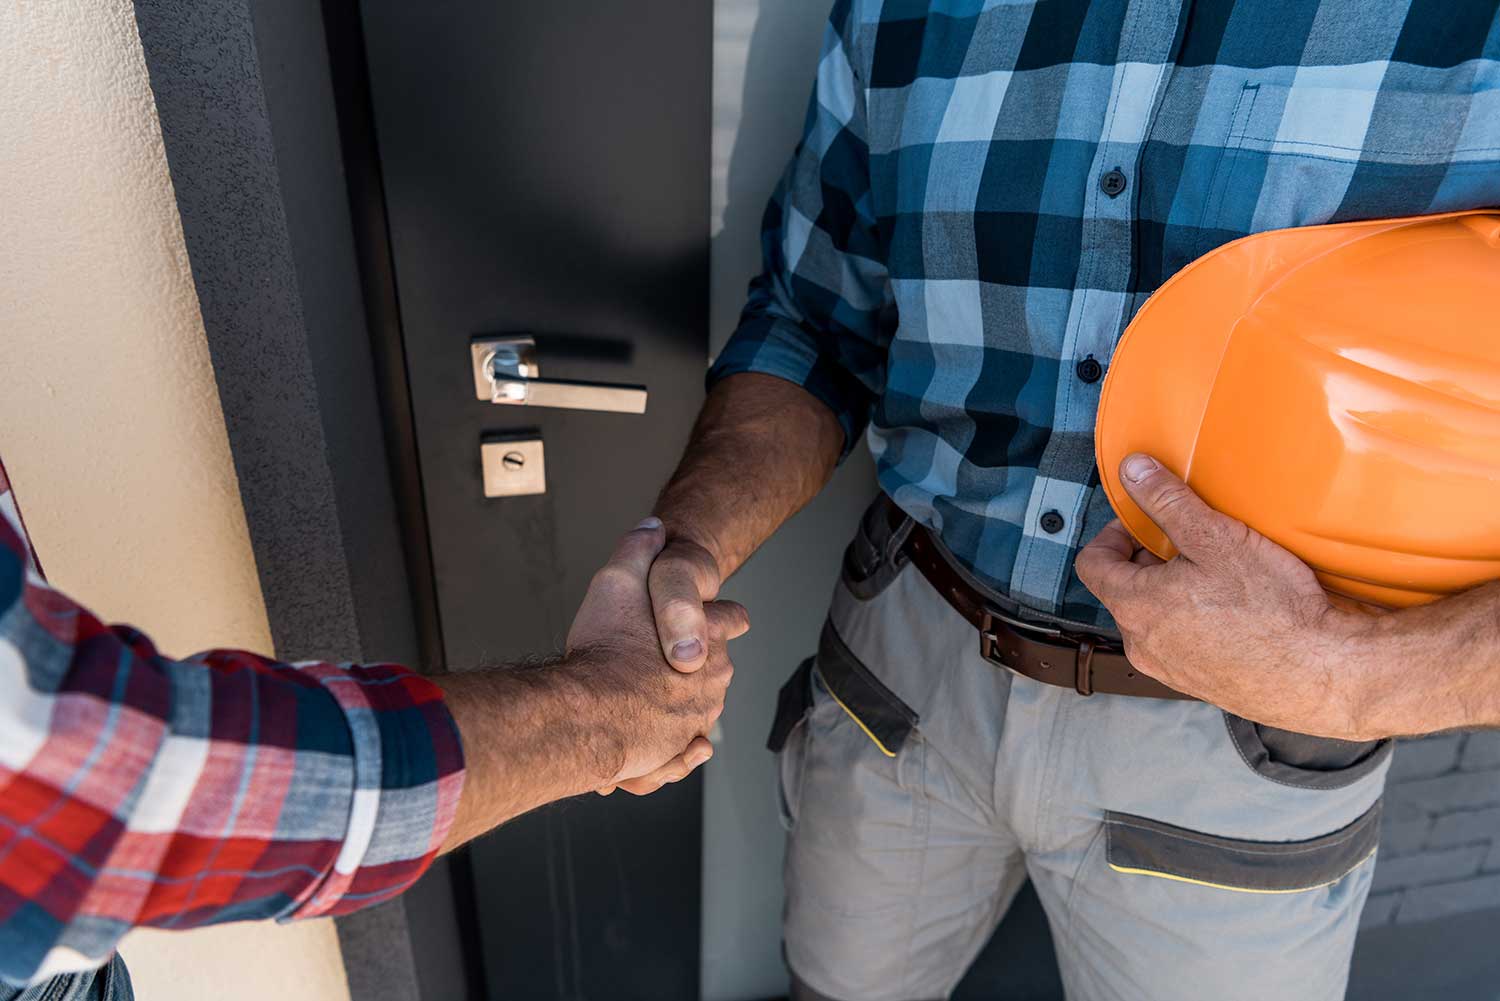 Builder in blue checkered shirt holding an orange hat shakes hands with someone at their home